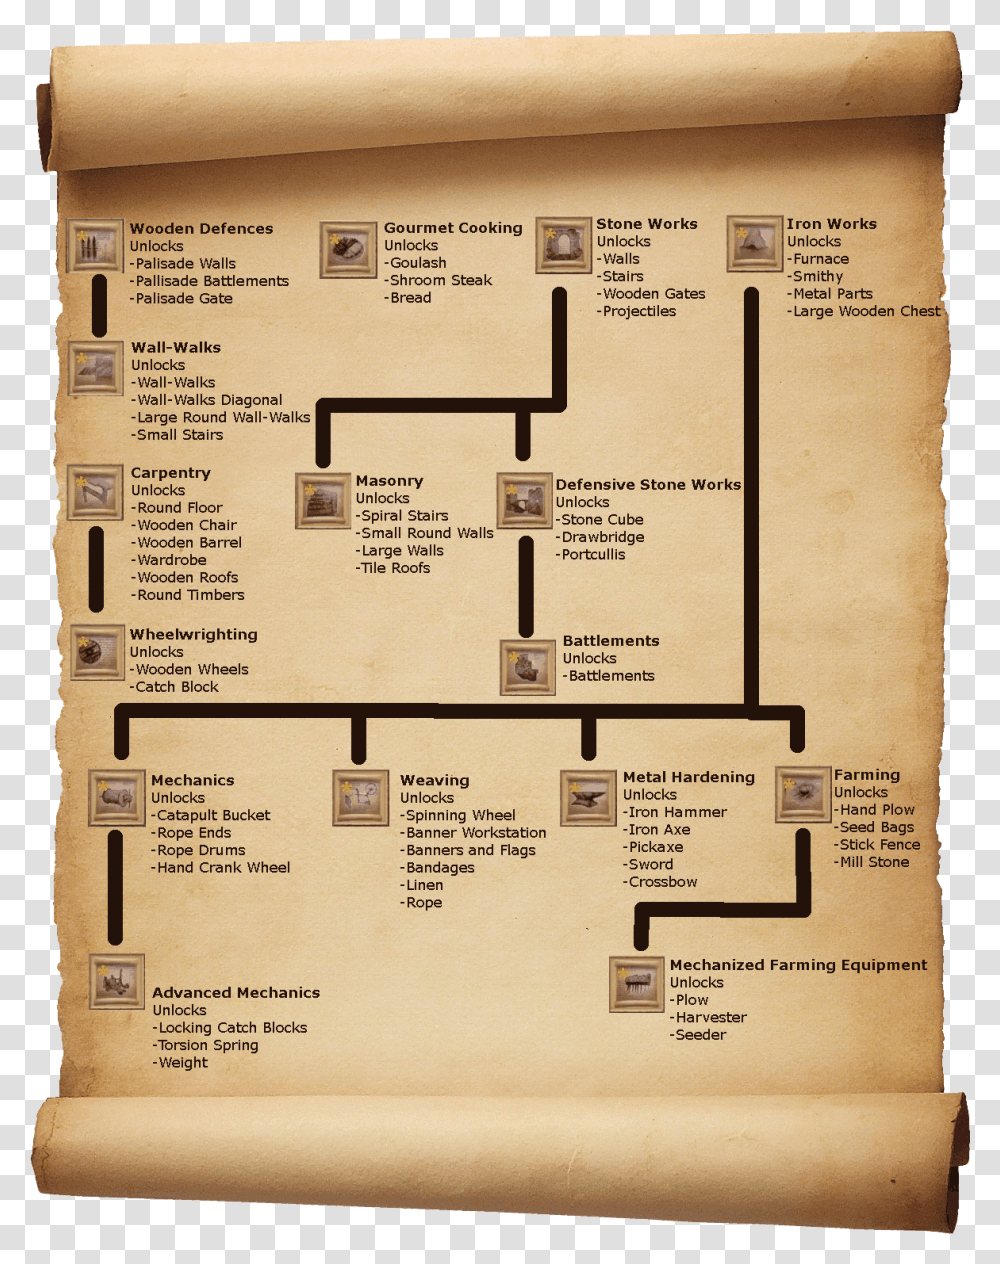 Filemedieval Engineers Research Treepng Medieval Medieval Engineers Tech Tree, Floor Plan, Diagram, Menu, Text Transparent Png